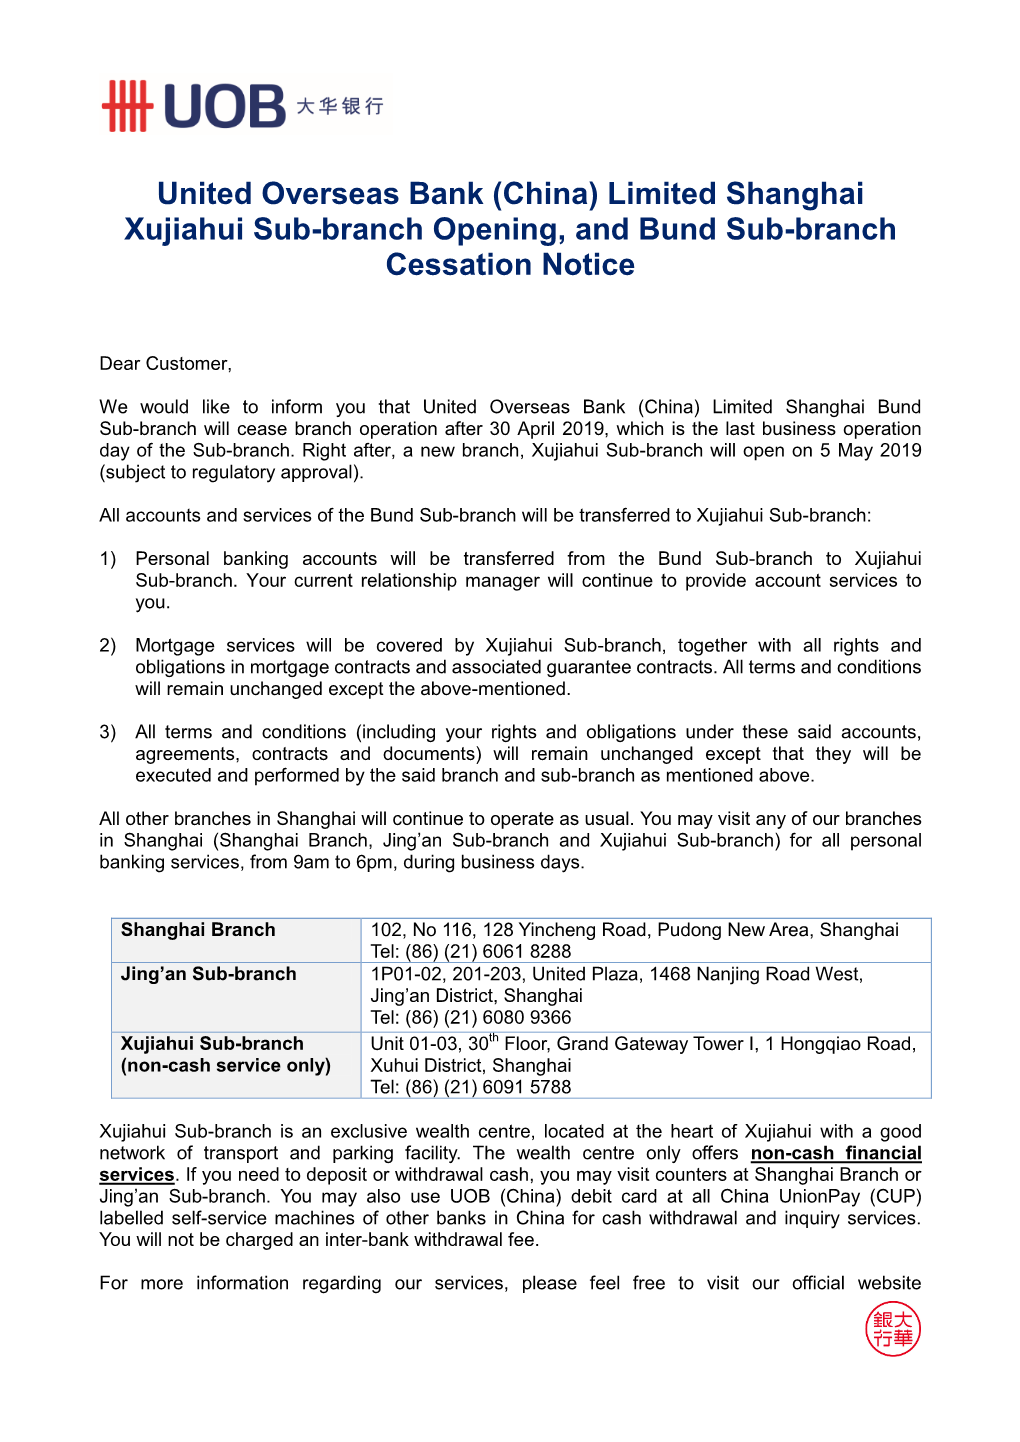 United Overseas Bank (China) Limited Shanghai Xujiahui Sub-Branch Opening, and Bund Sub-Branch Cessation Notice